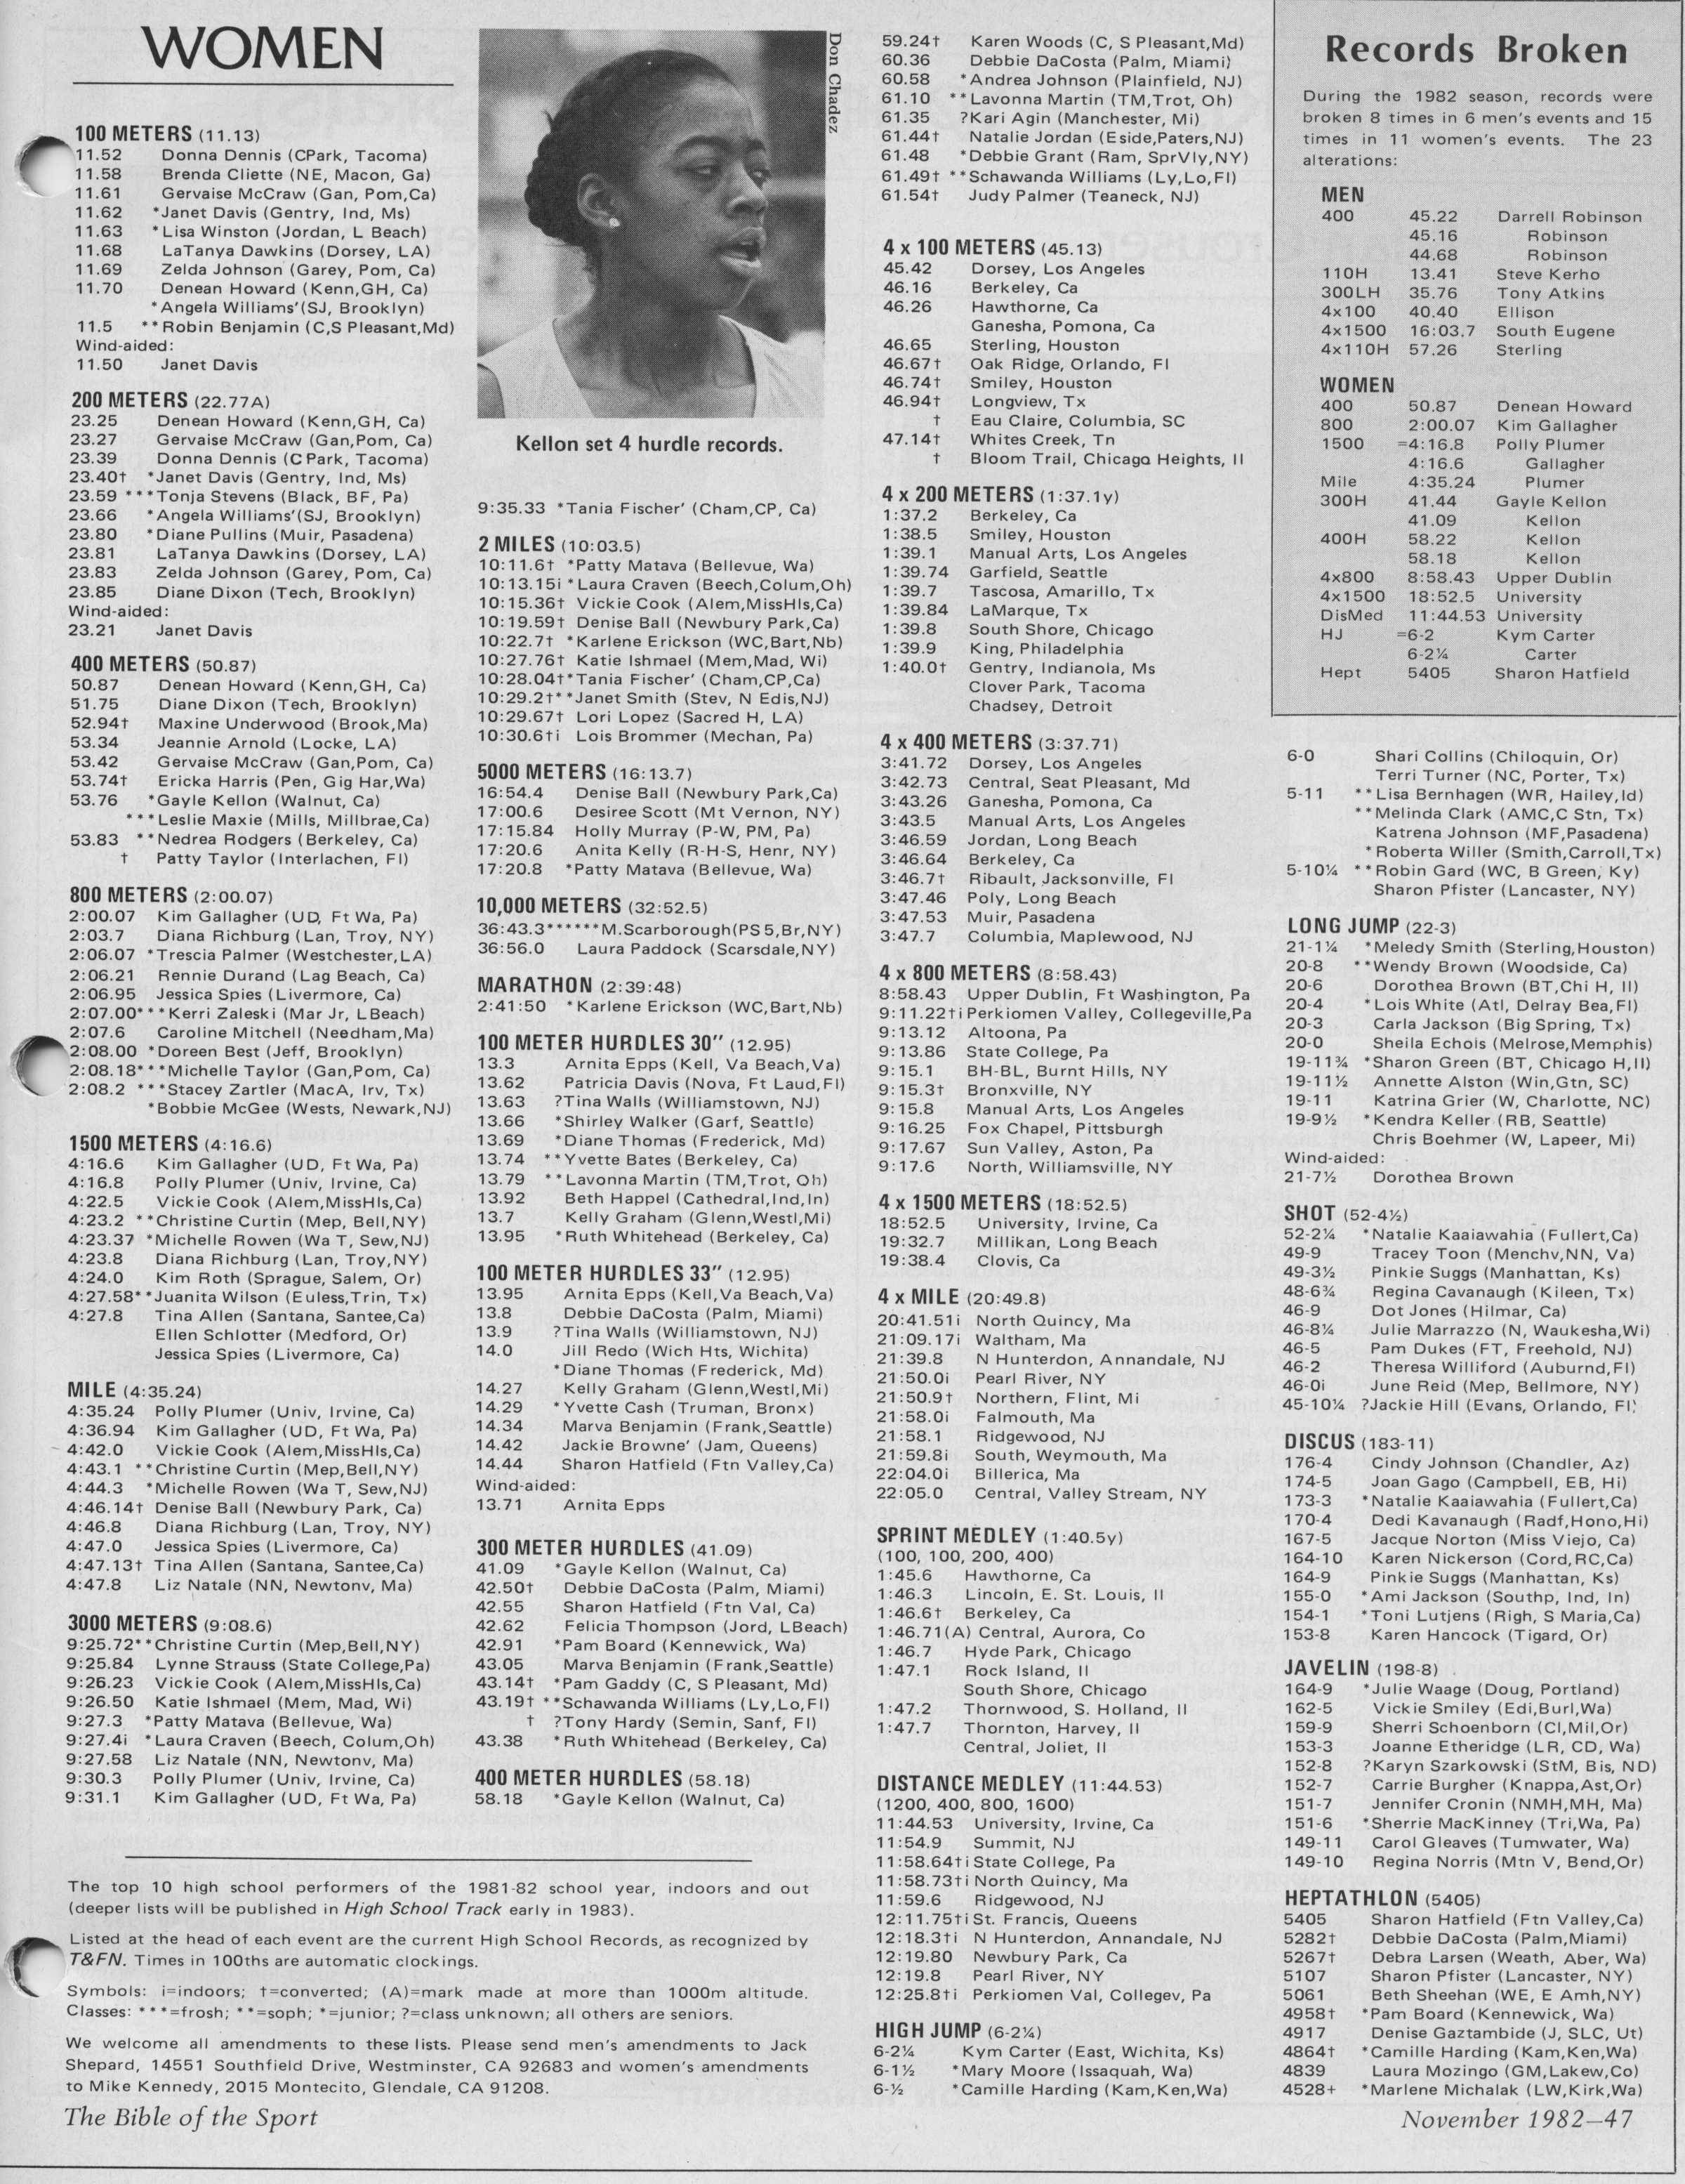 1982 Track & Field News - Top Marks List - Nov '82 issue